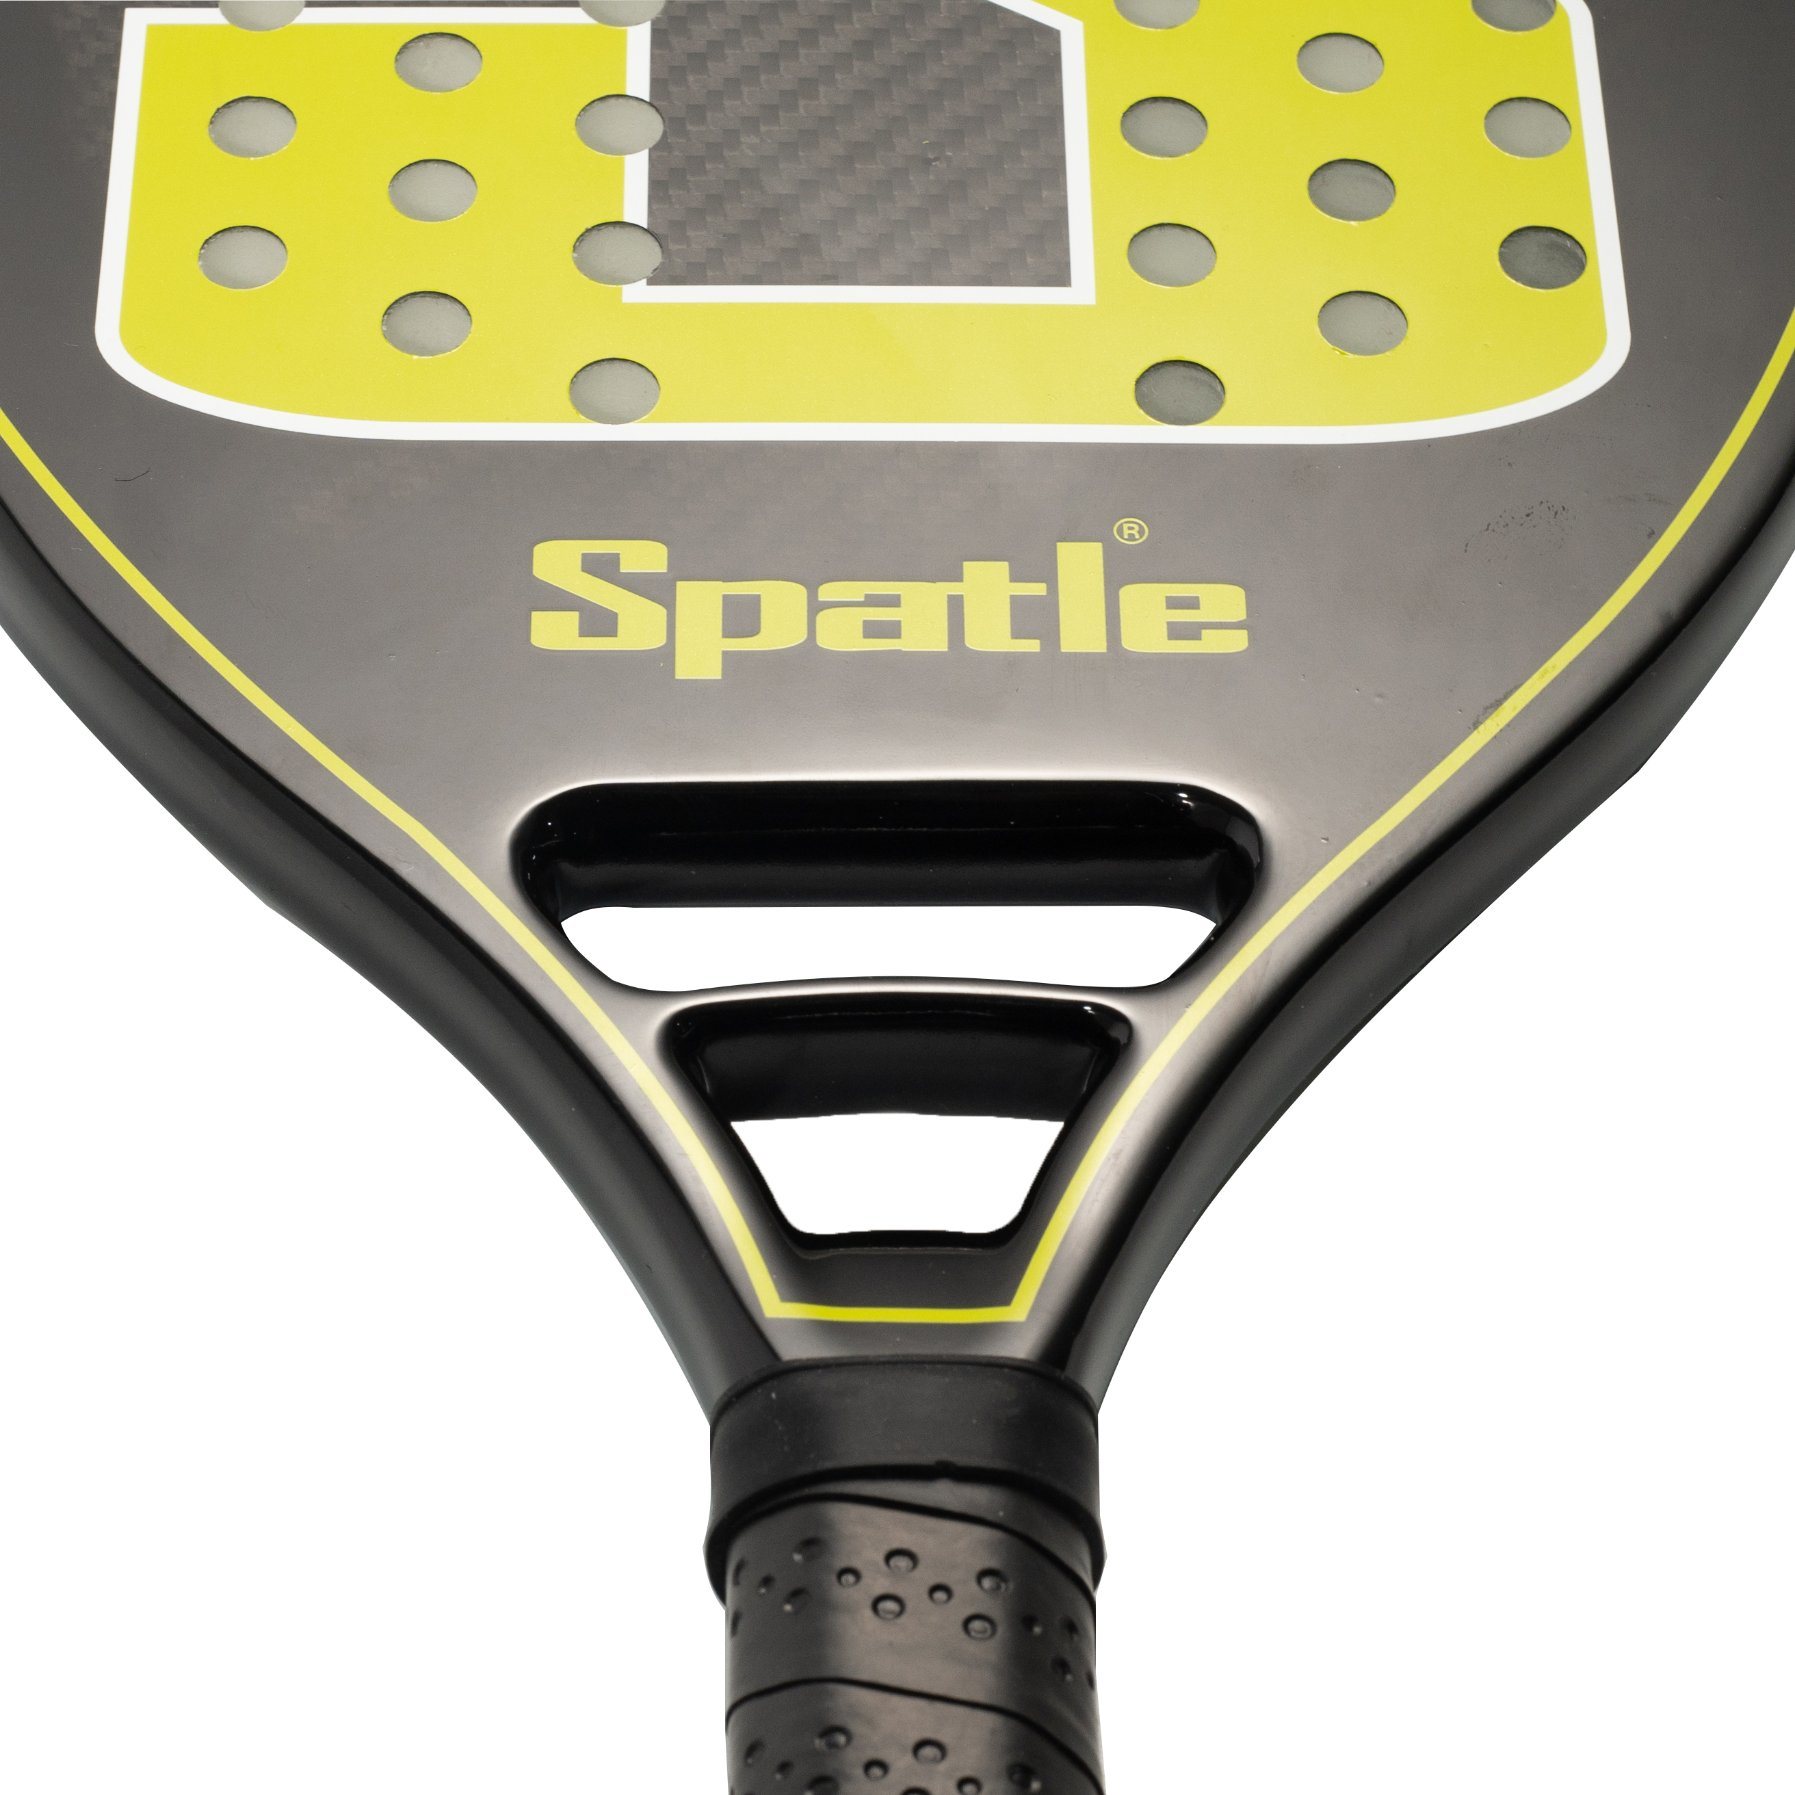 Top Saleing Beach Tennis Racquets Pickleball Paddle